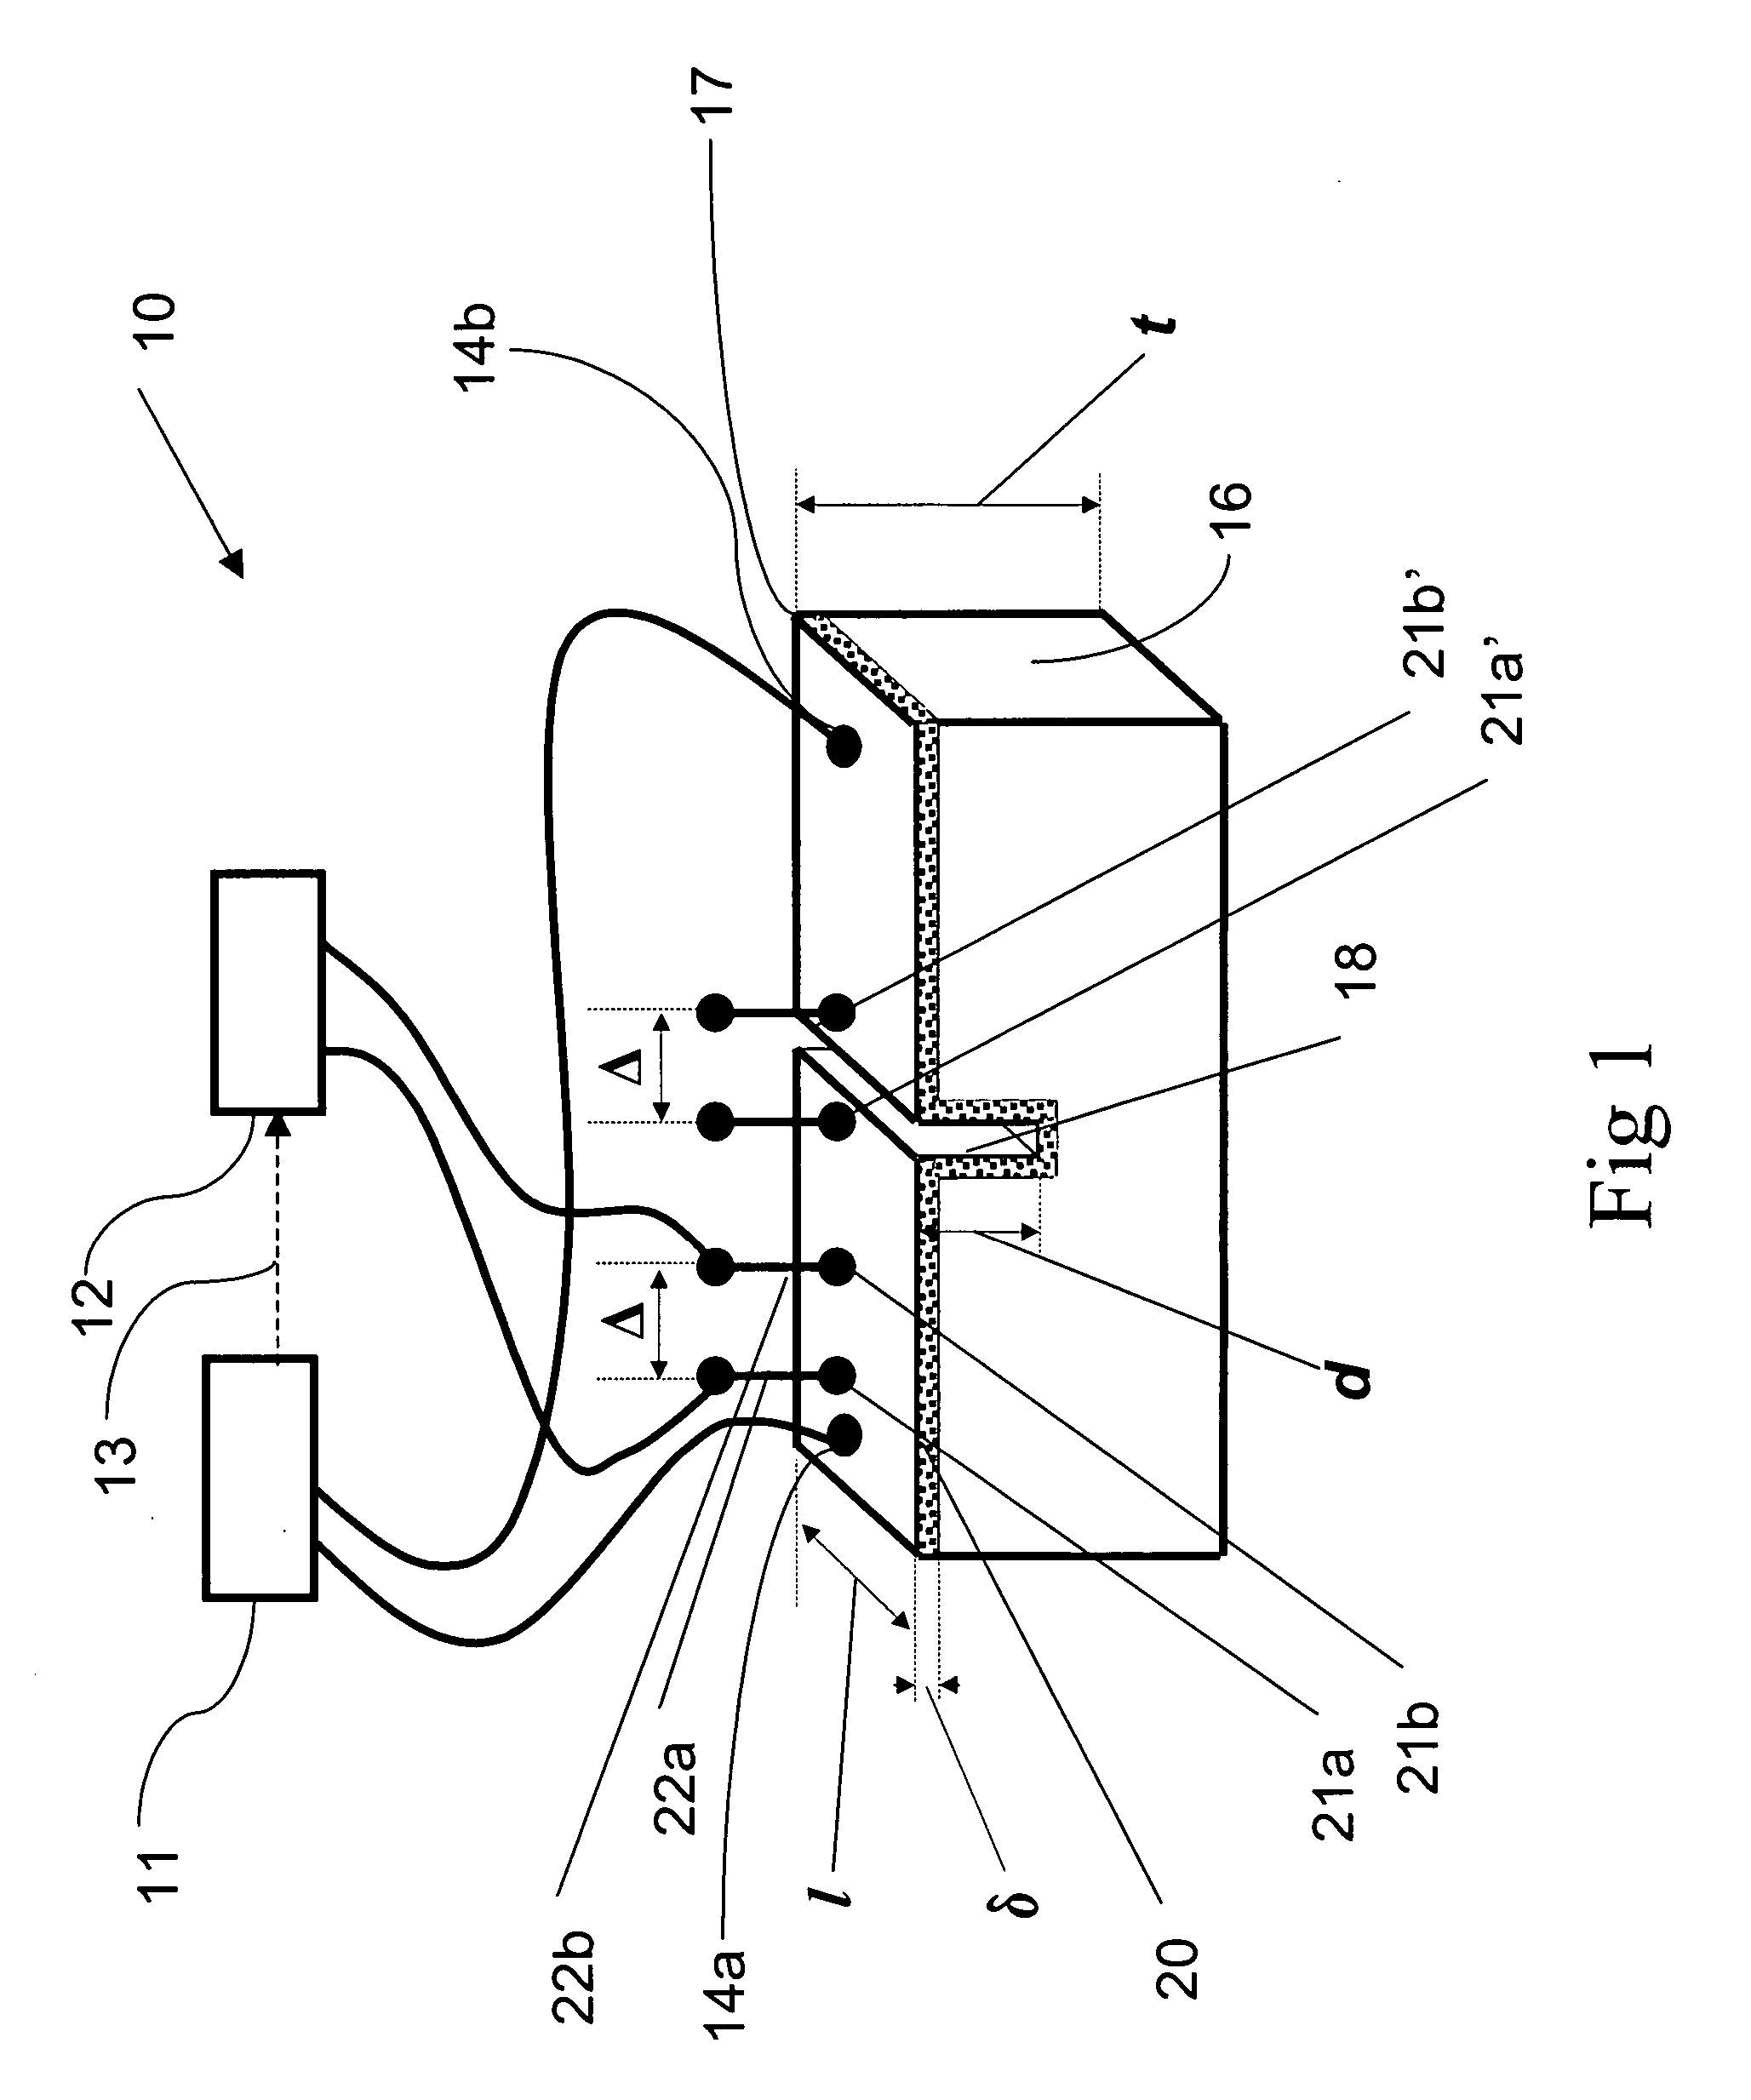 System and method for depth determination of cracks in conducting structures